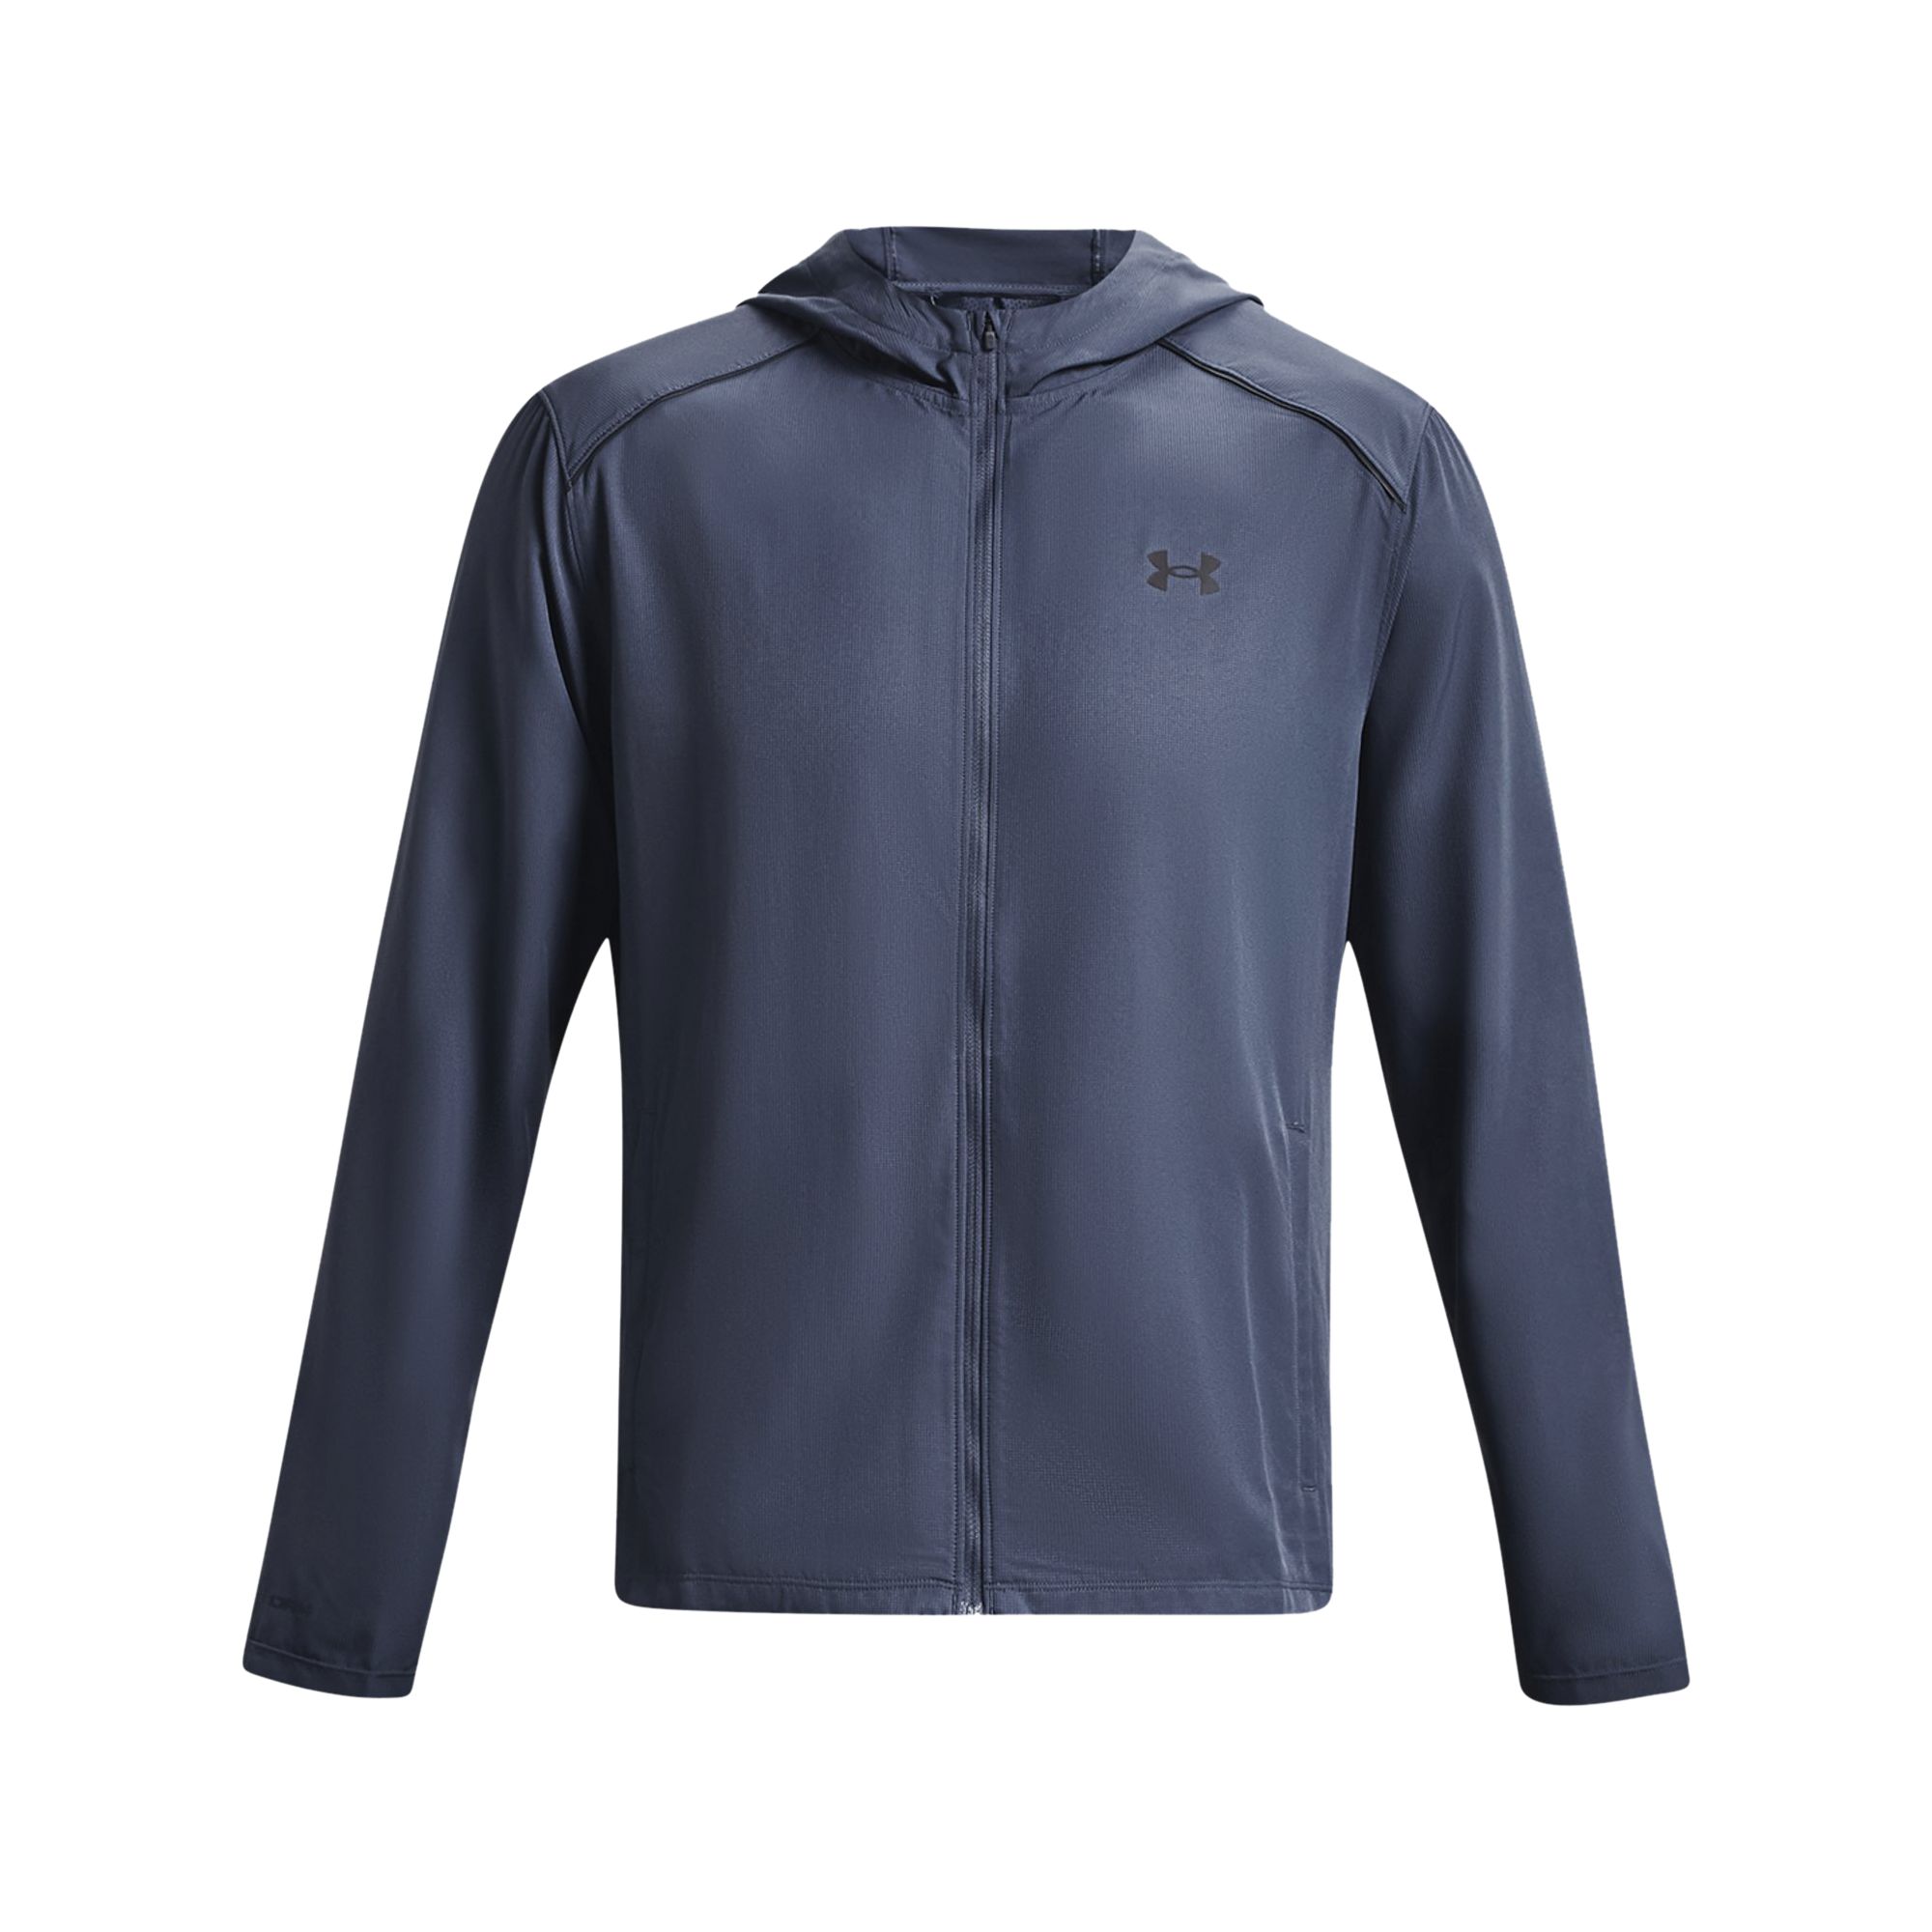 UA STORM RUN HOODED JACKET Under Armour hervis.ro